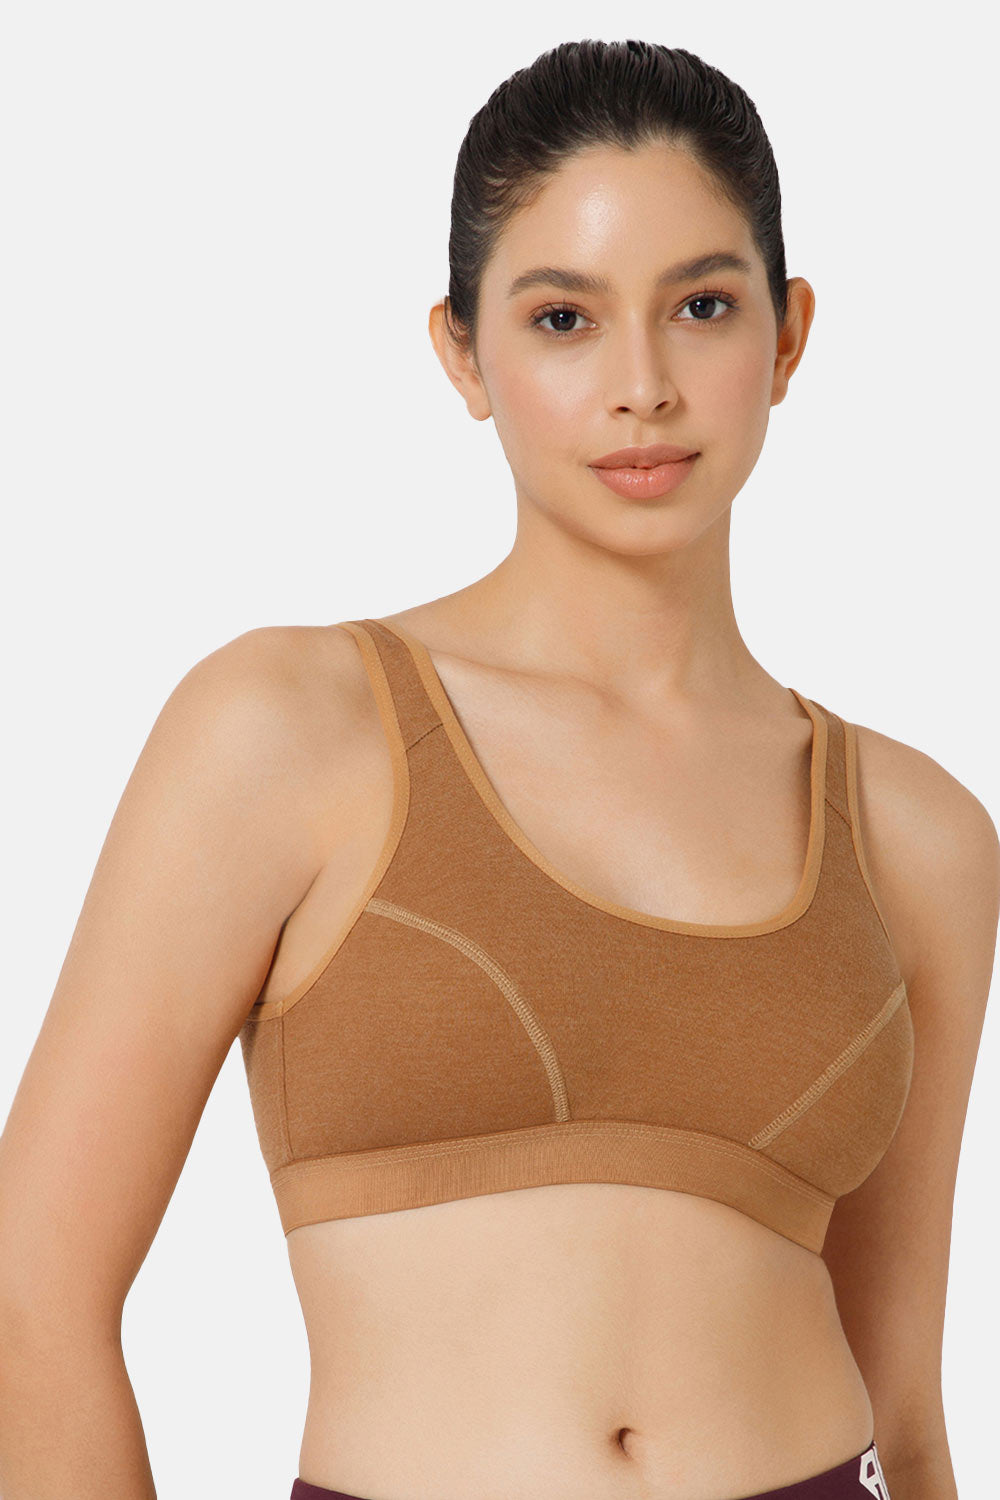 Buy Gymmer Women Non-Padded Solid Sports Bra (Grey, Small) at